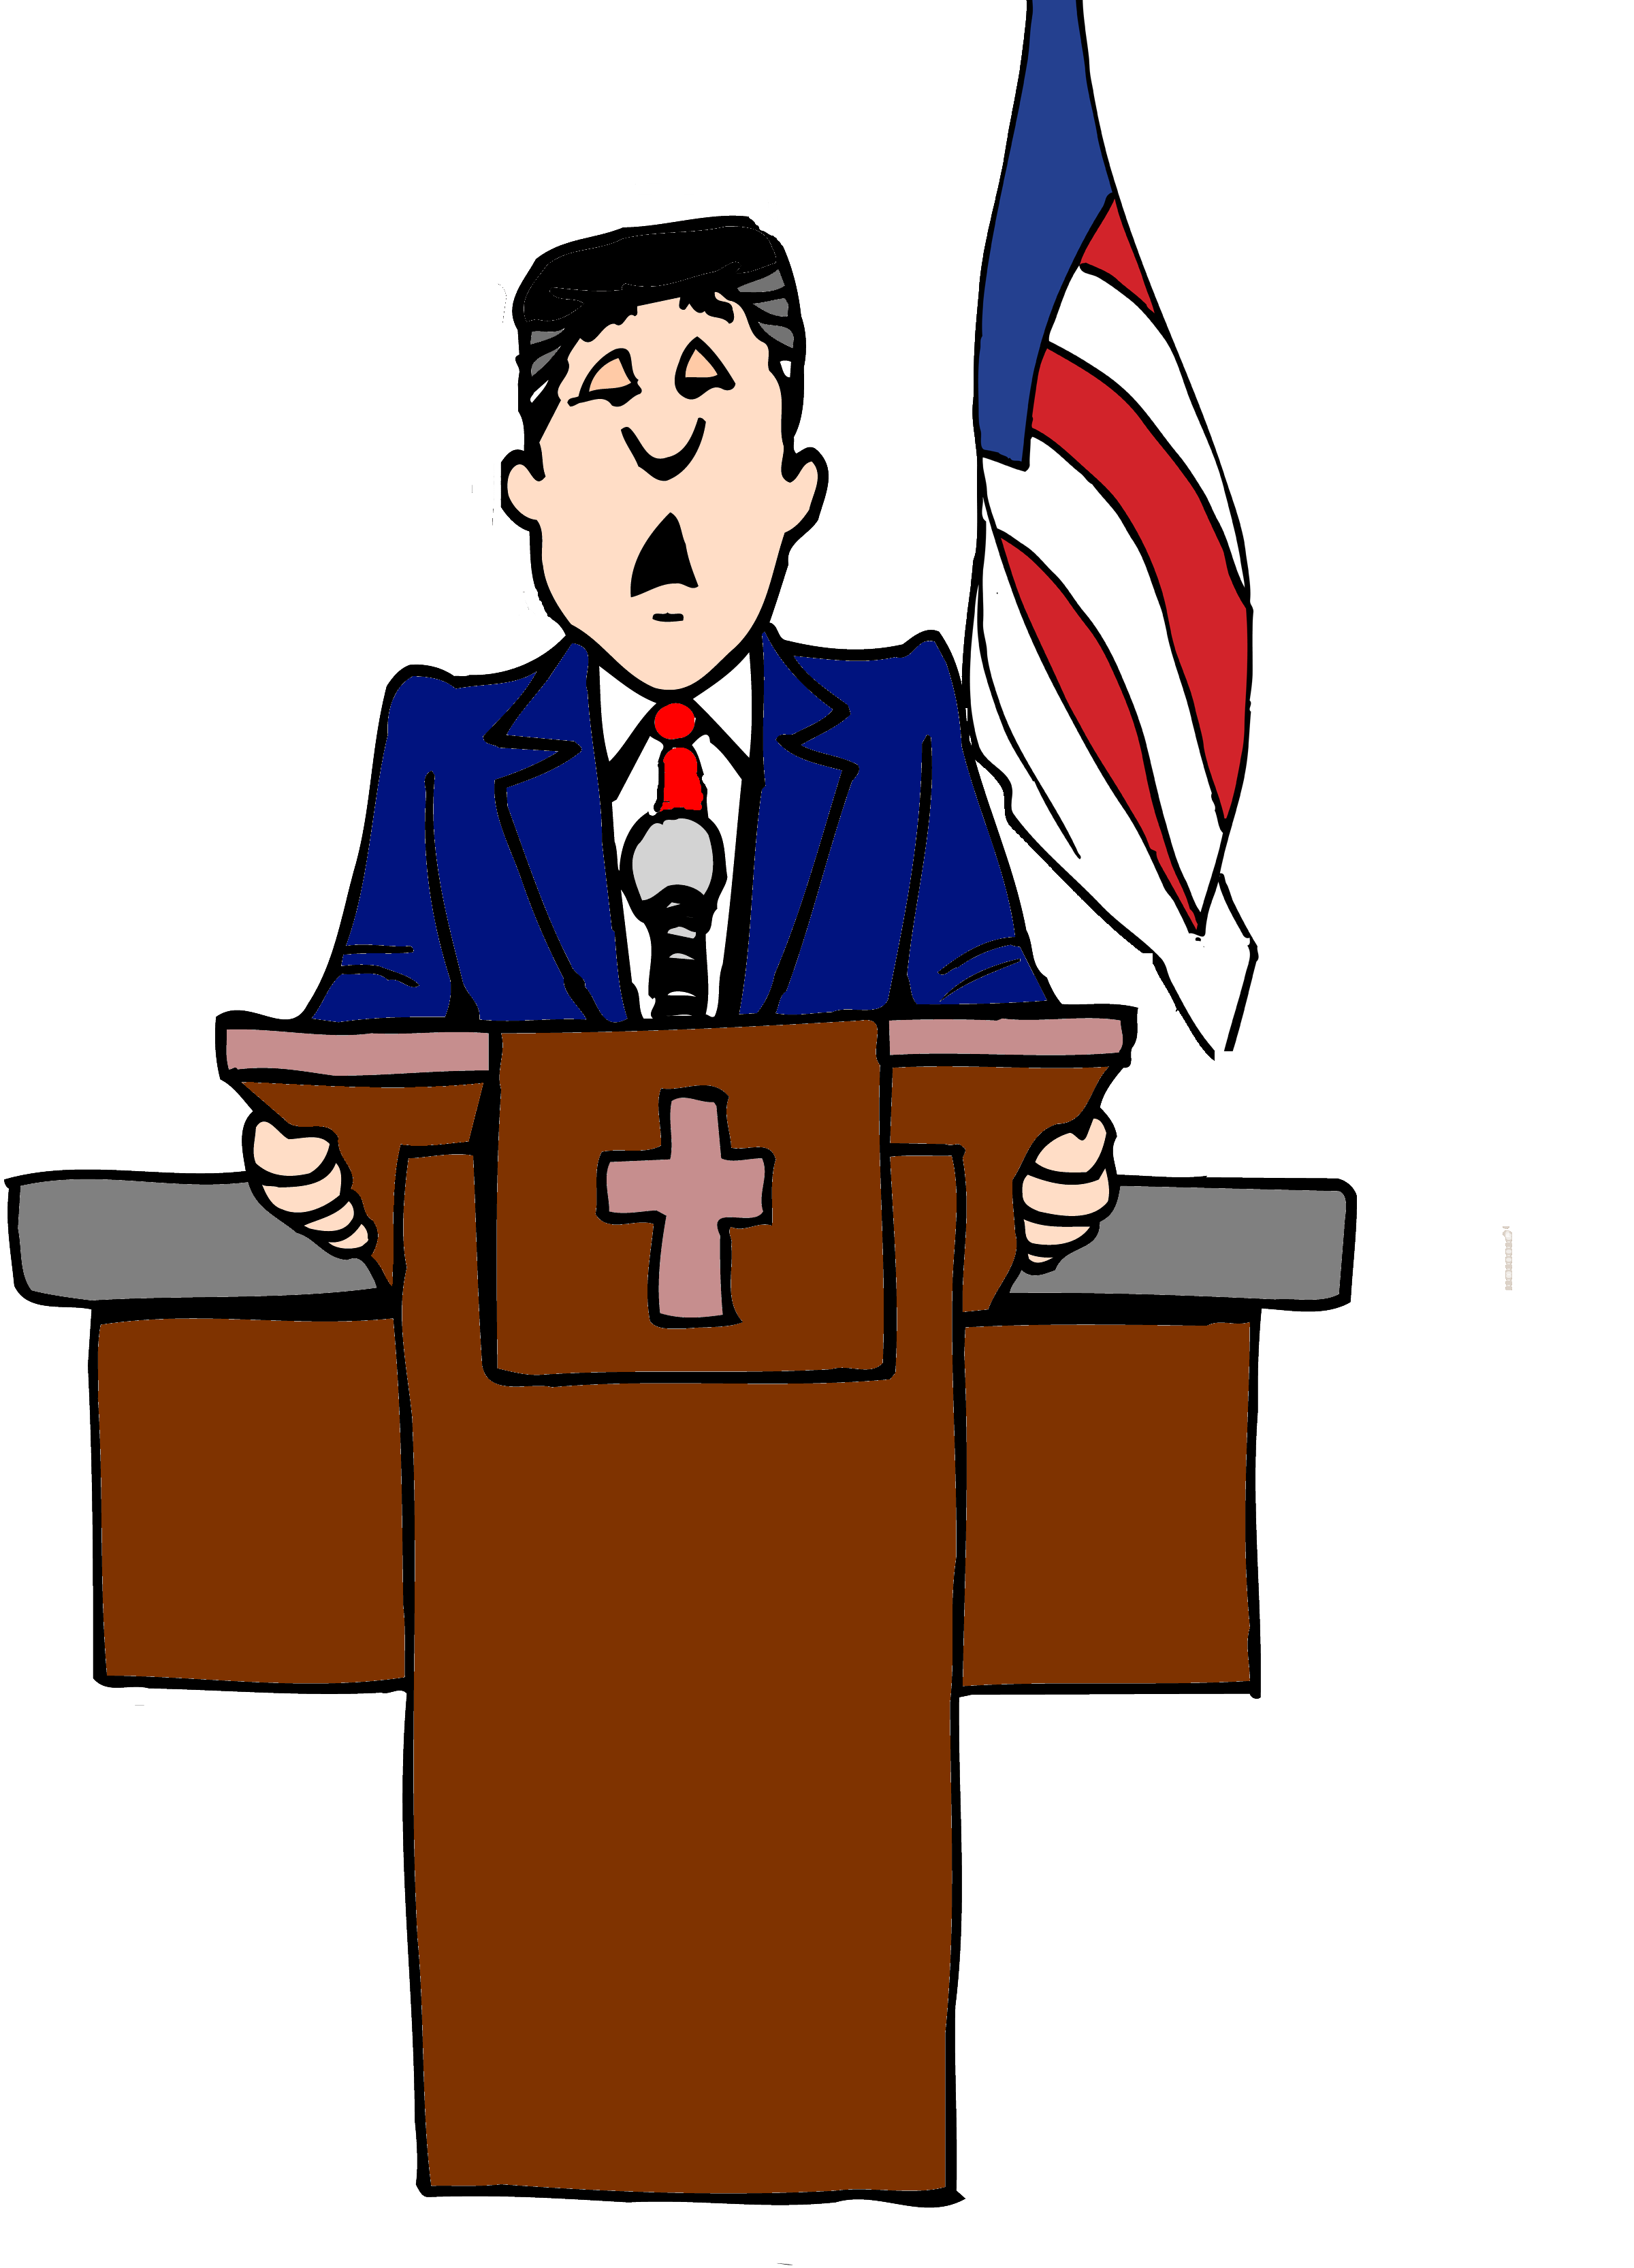 Religion diary of a. Evidence clipart intrigue